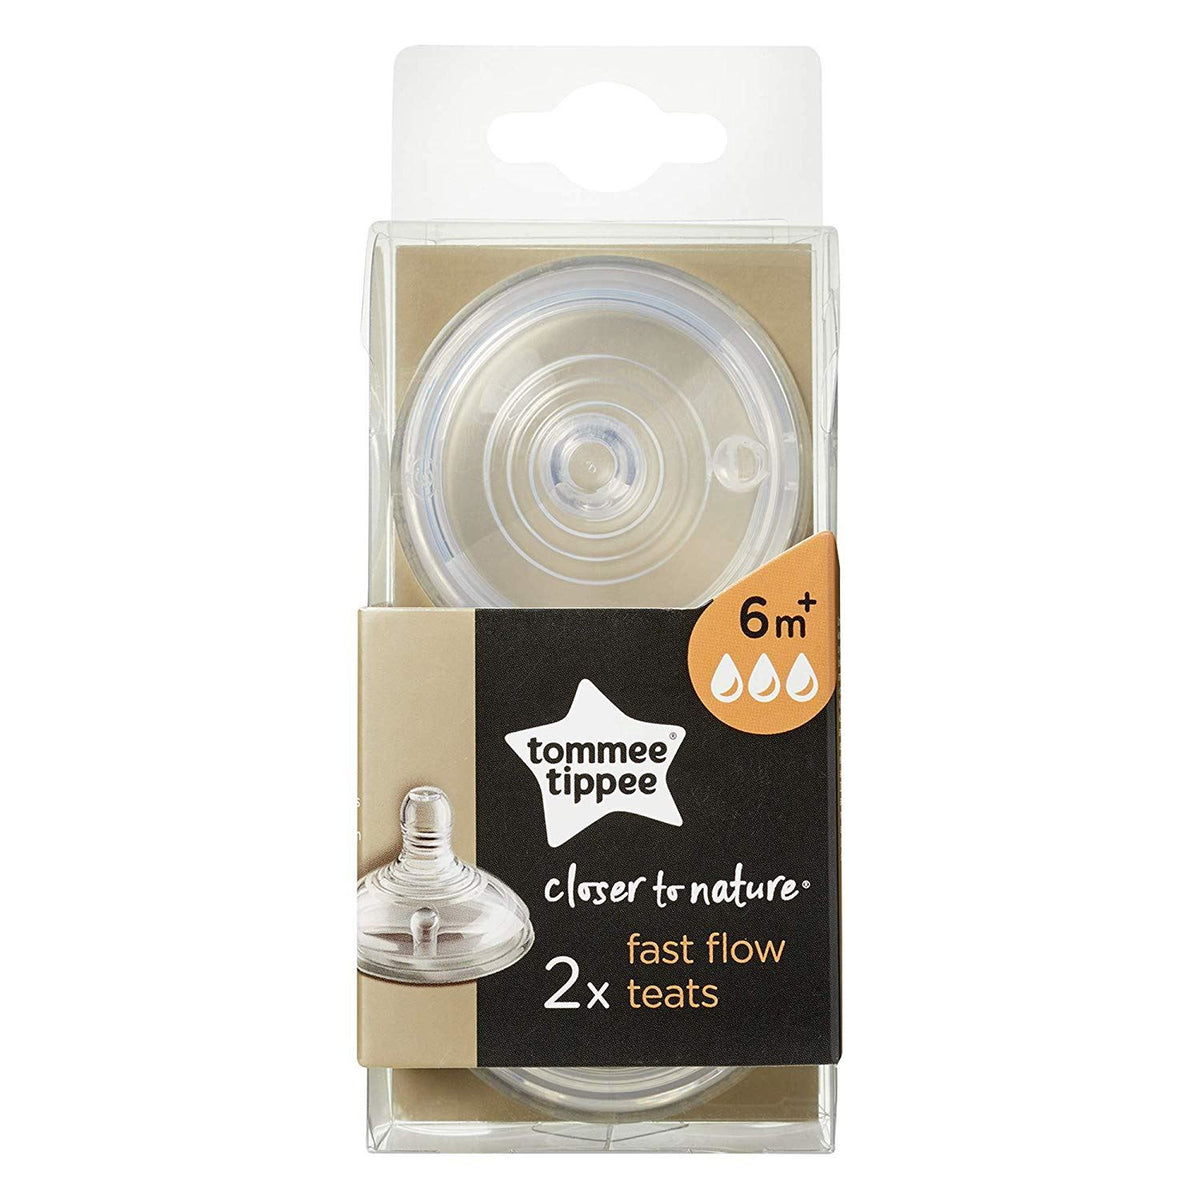 Tommee Tippee Closer to Nature PK of 2 Teats-Fast flow 6M+